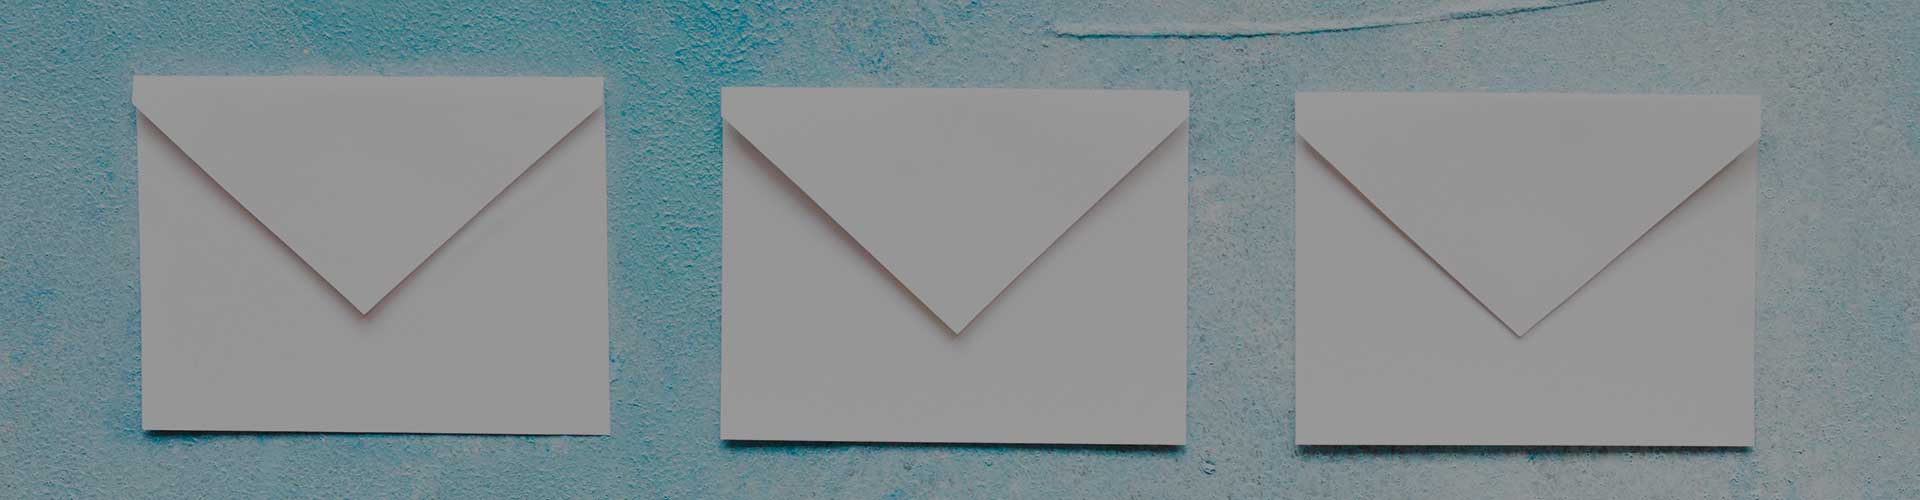 three closed envelopes on a blue painted background